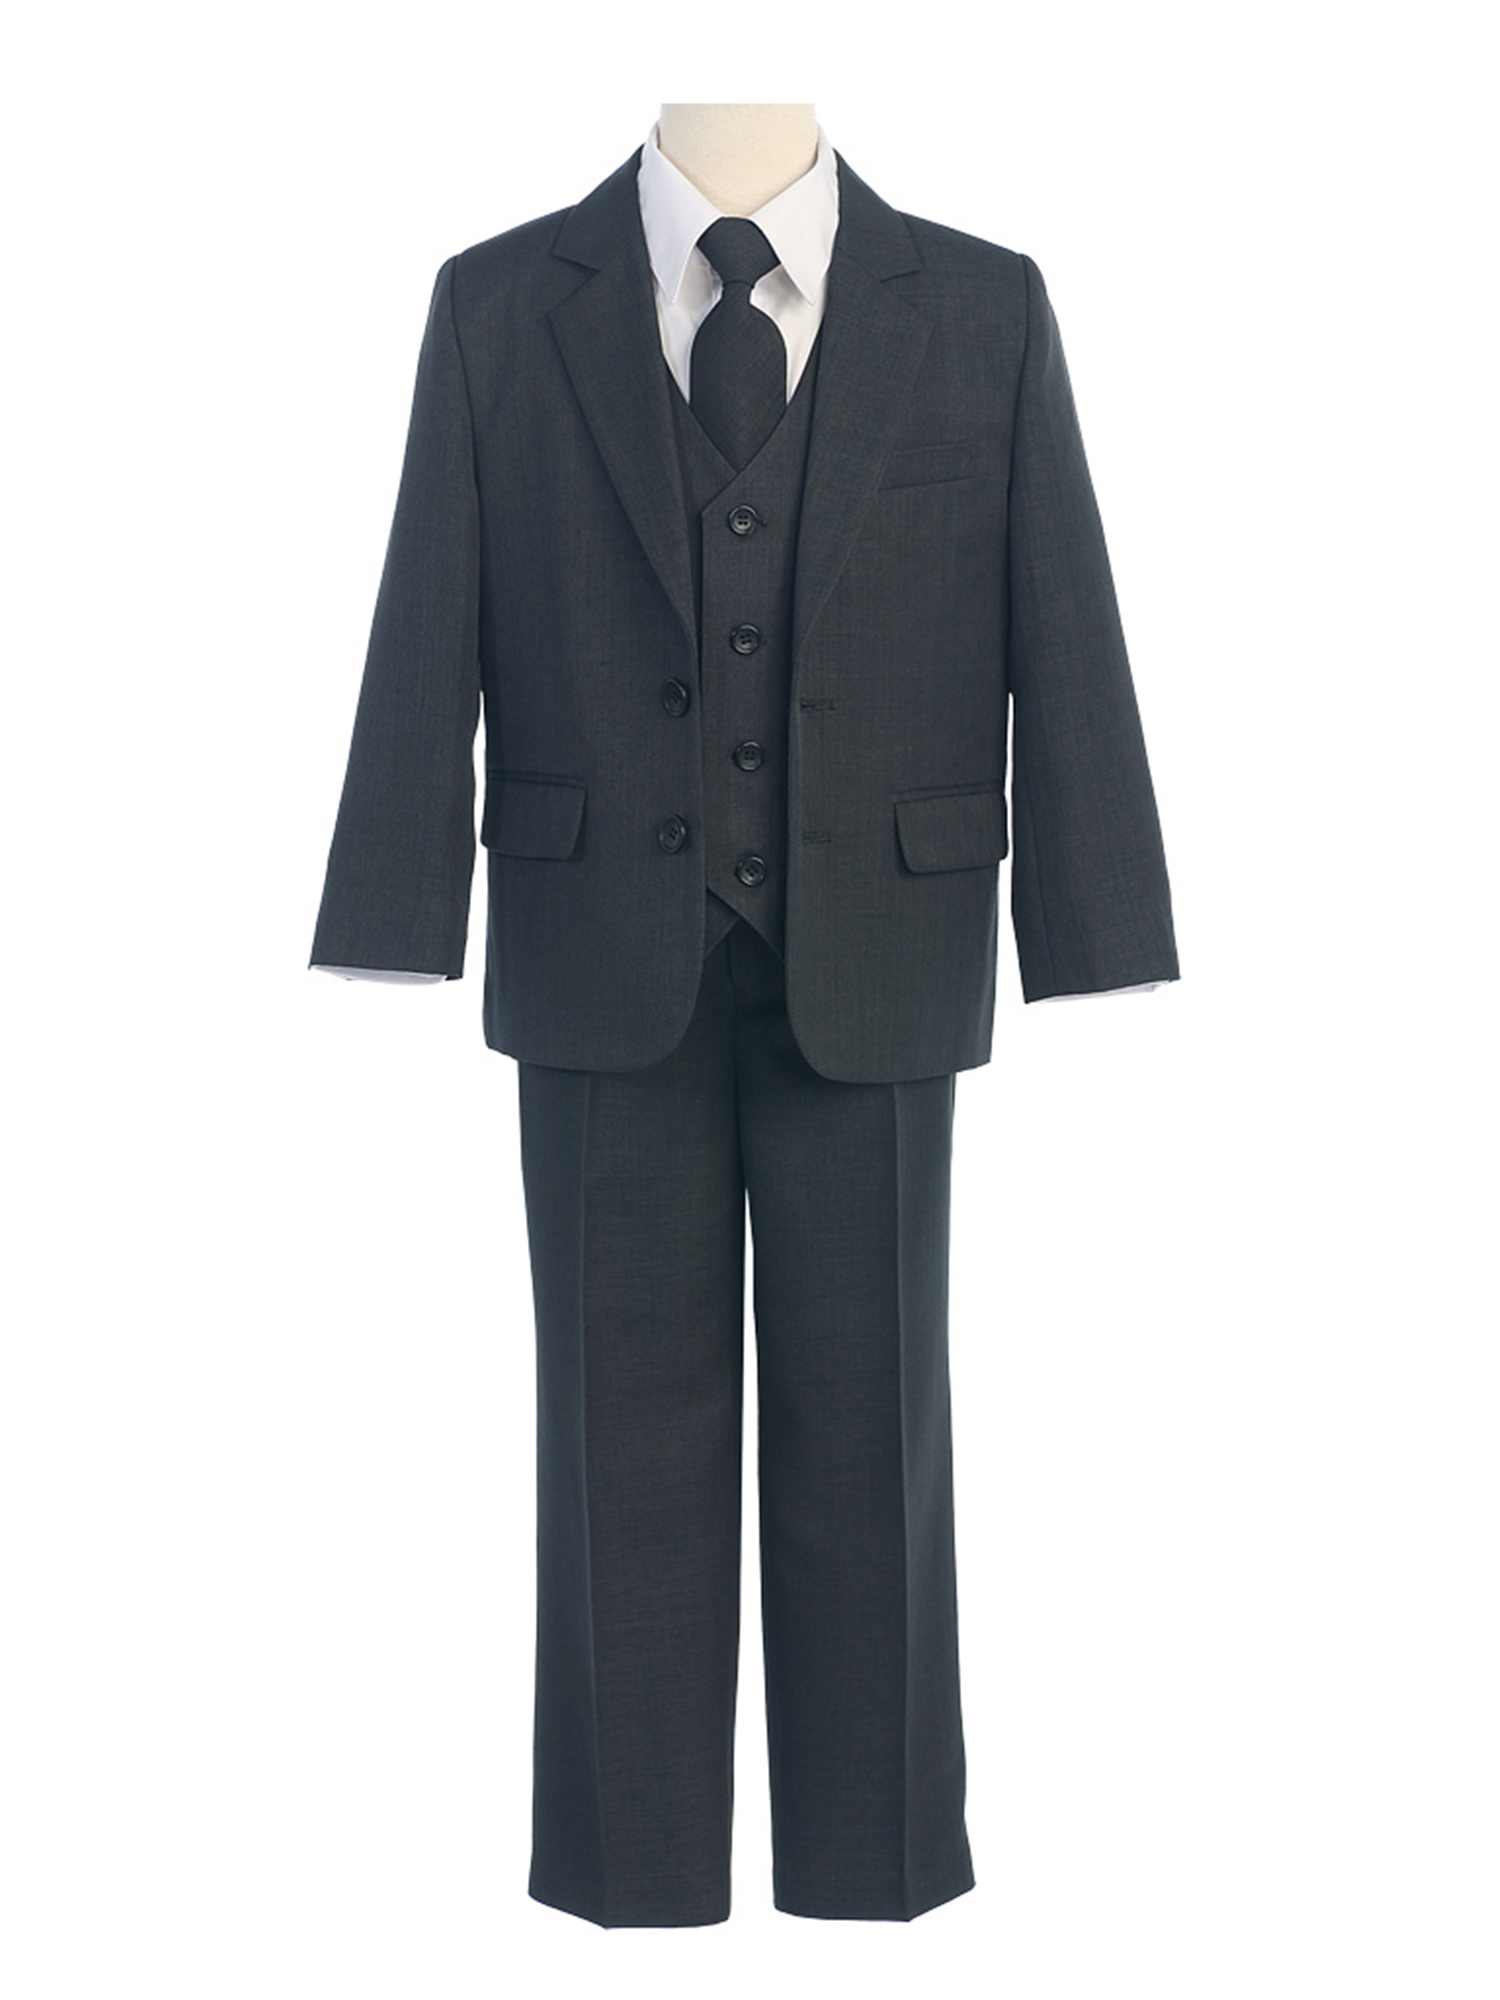 COLE Boys Suit with Shirt and Vest (5-Piece) - Charcoal Grey - Size 10